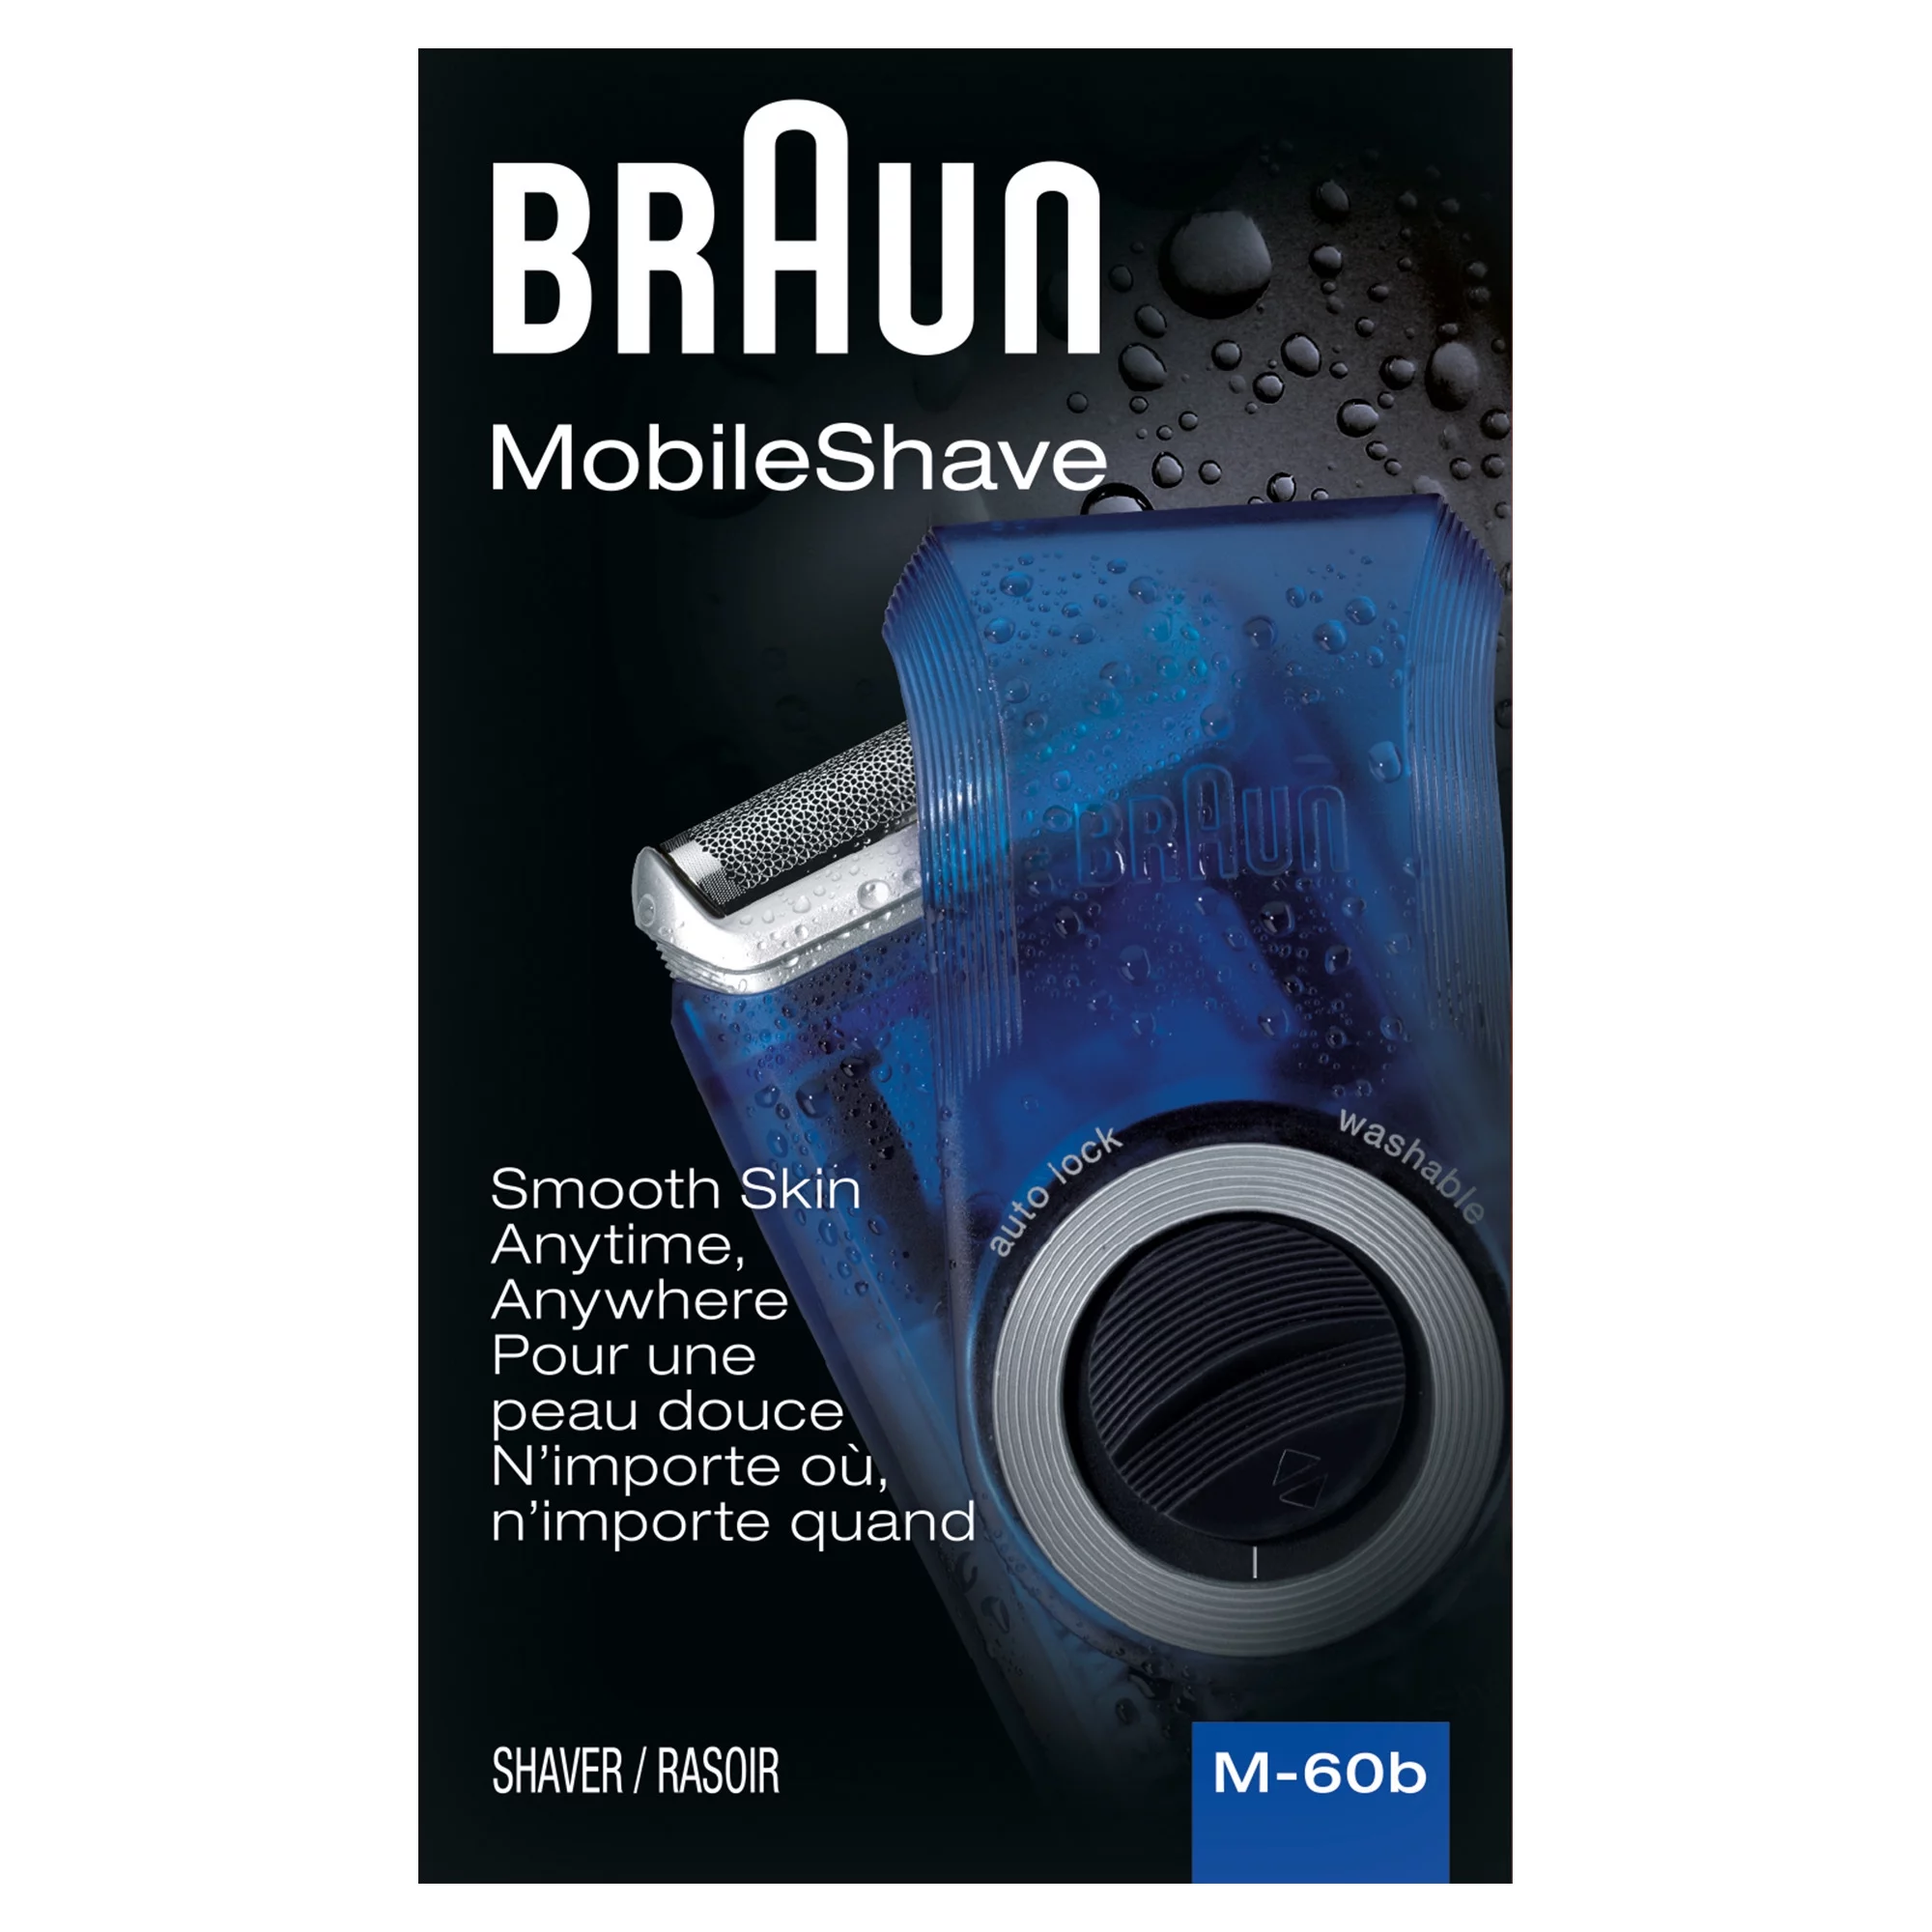 Braun M60b Mobile Battery Powered Electric Shaver for Men